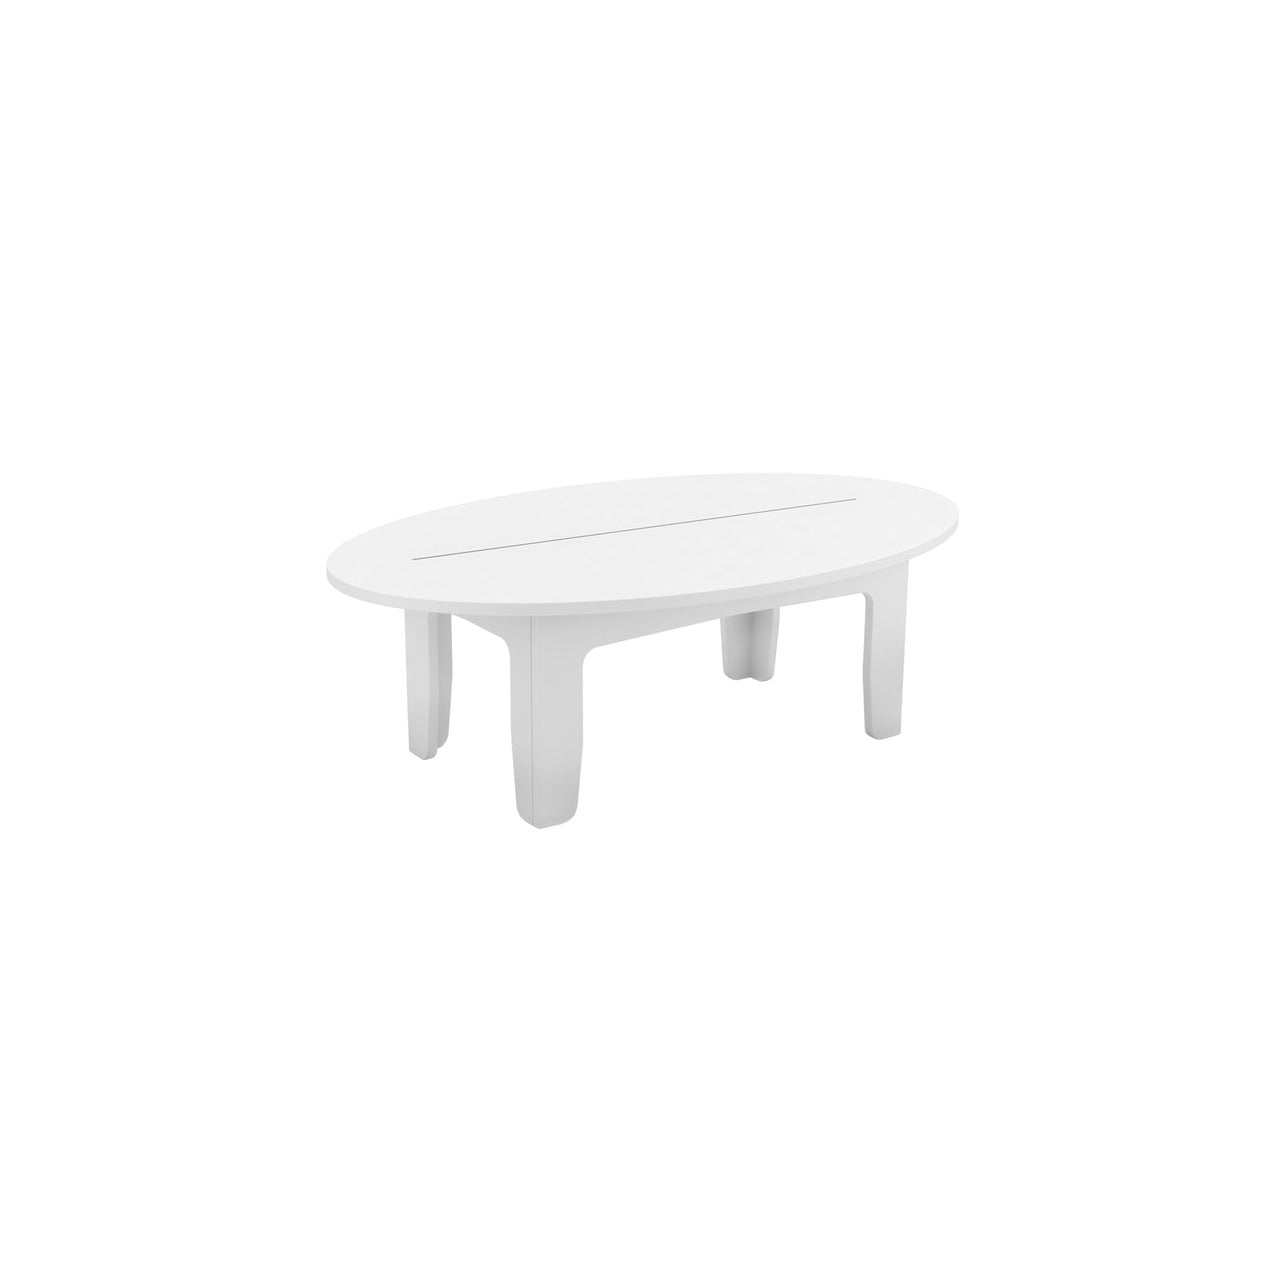 Ledge Lounger Mainstay Oval Coffee Table